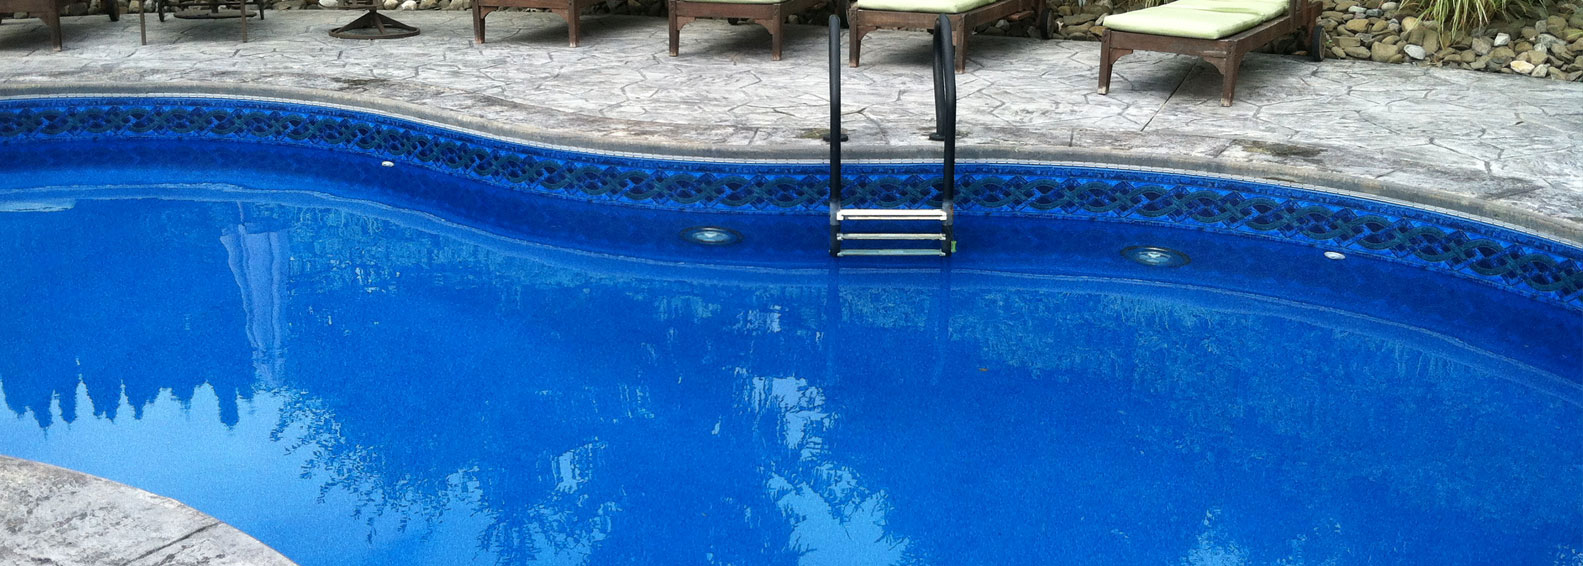 Welcome to Swimming Pool Repair Experts